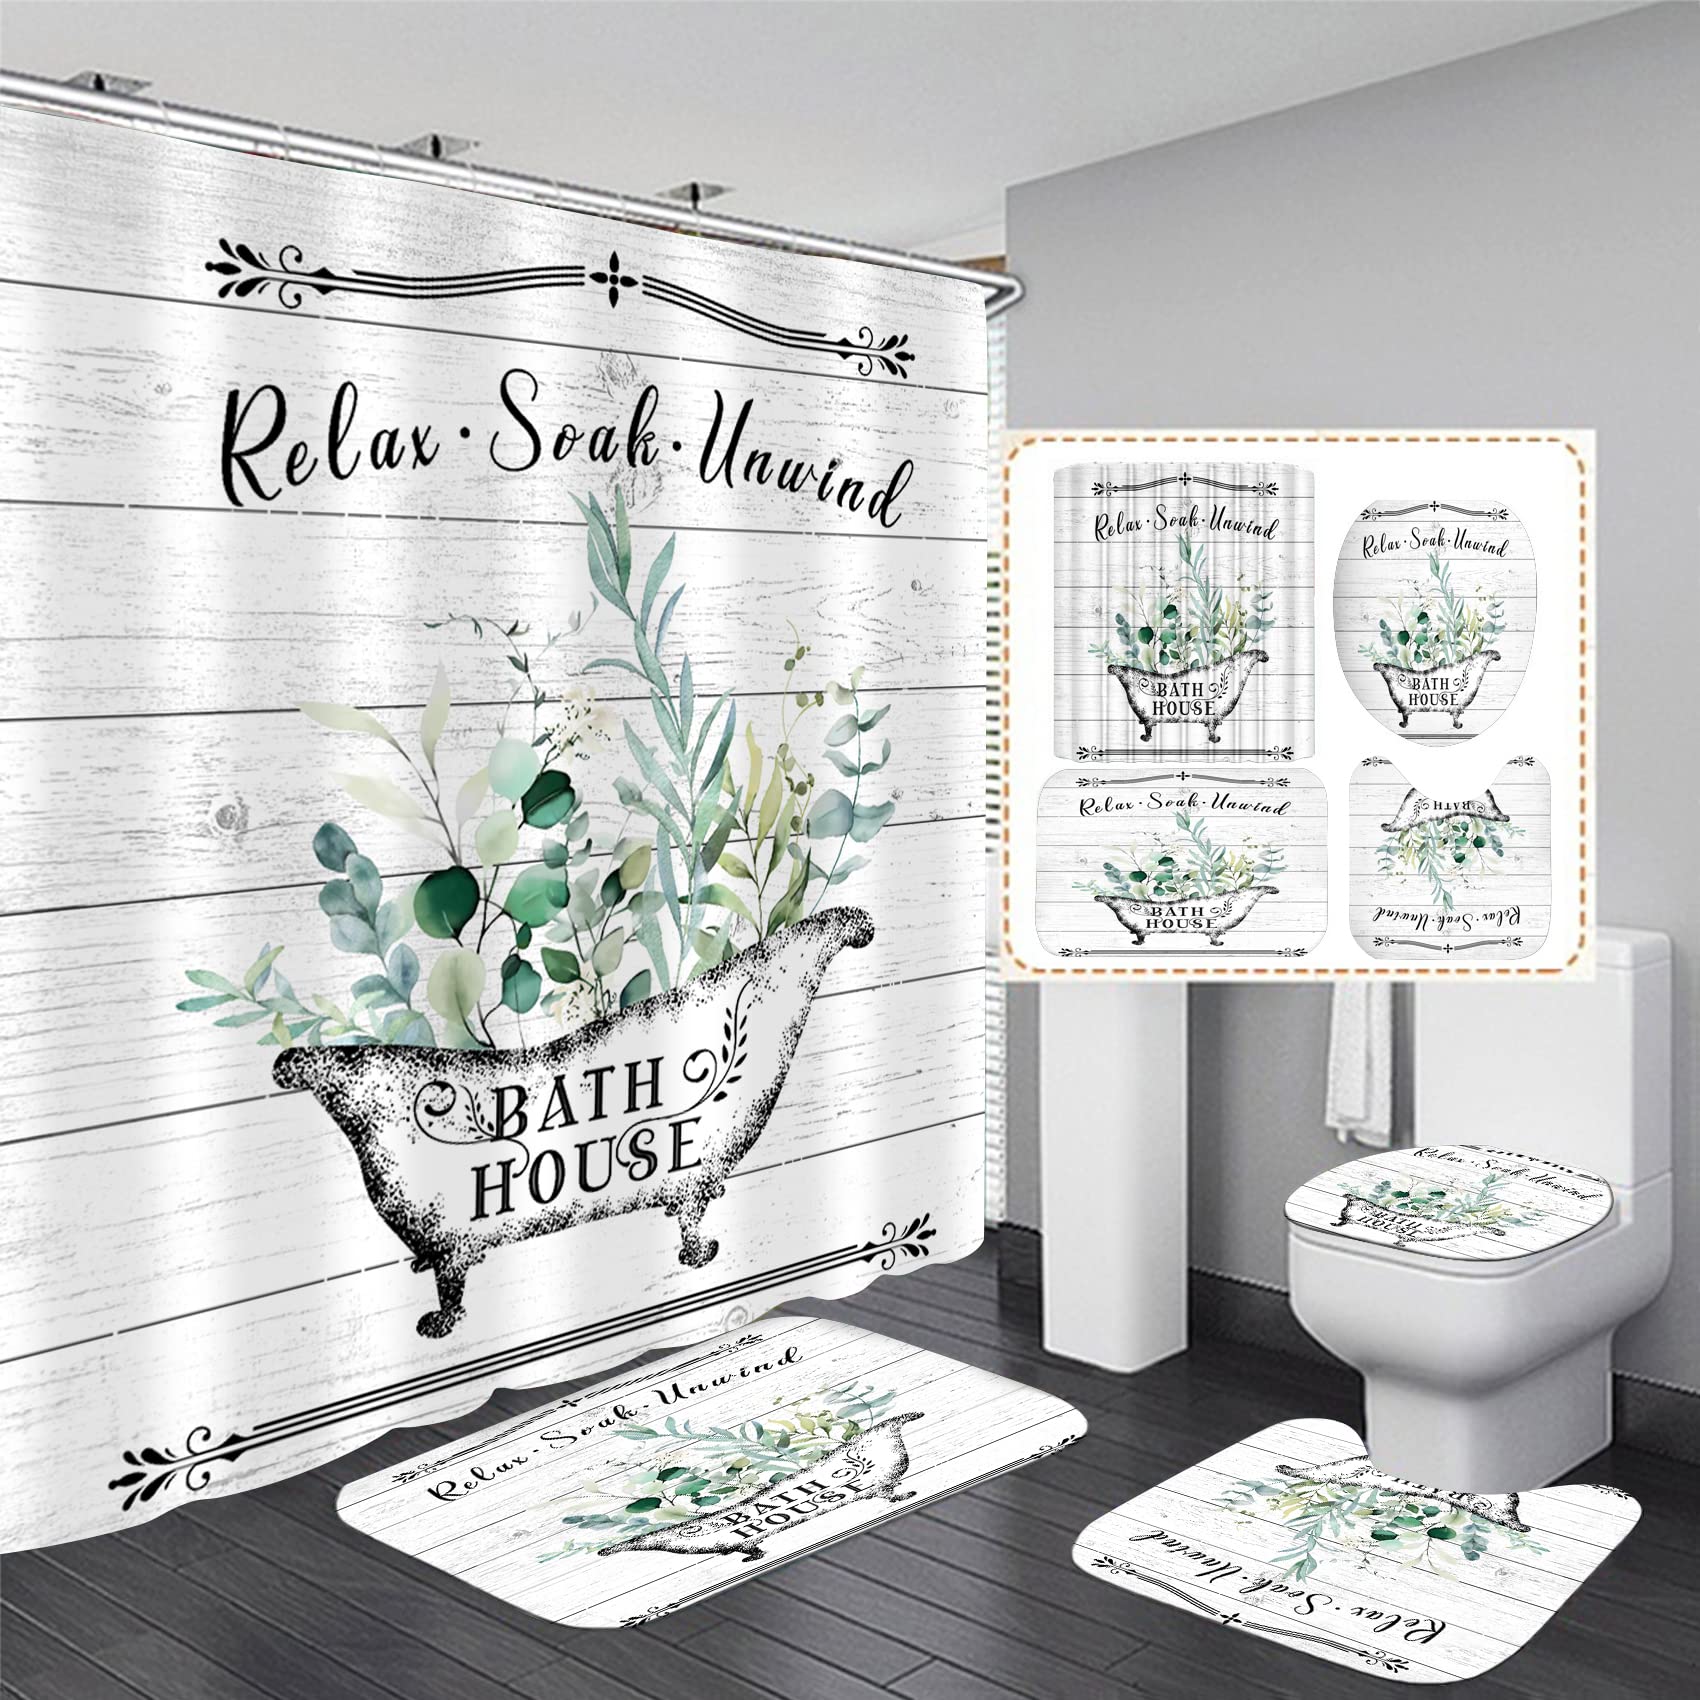 Nkzply 4 Pcs Farmhouse Shower curtain Set Vintage Floral Bathroom Sets with Shower curtain and Rugs Rustic Flower Leaves Bathroom Decor